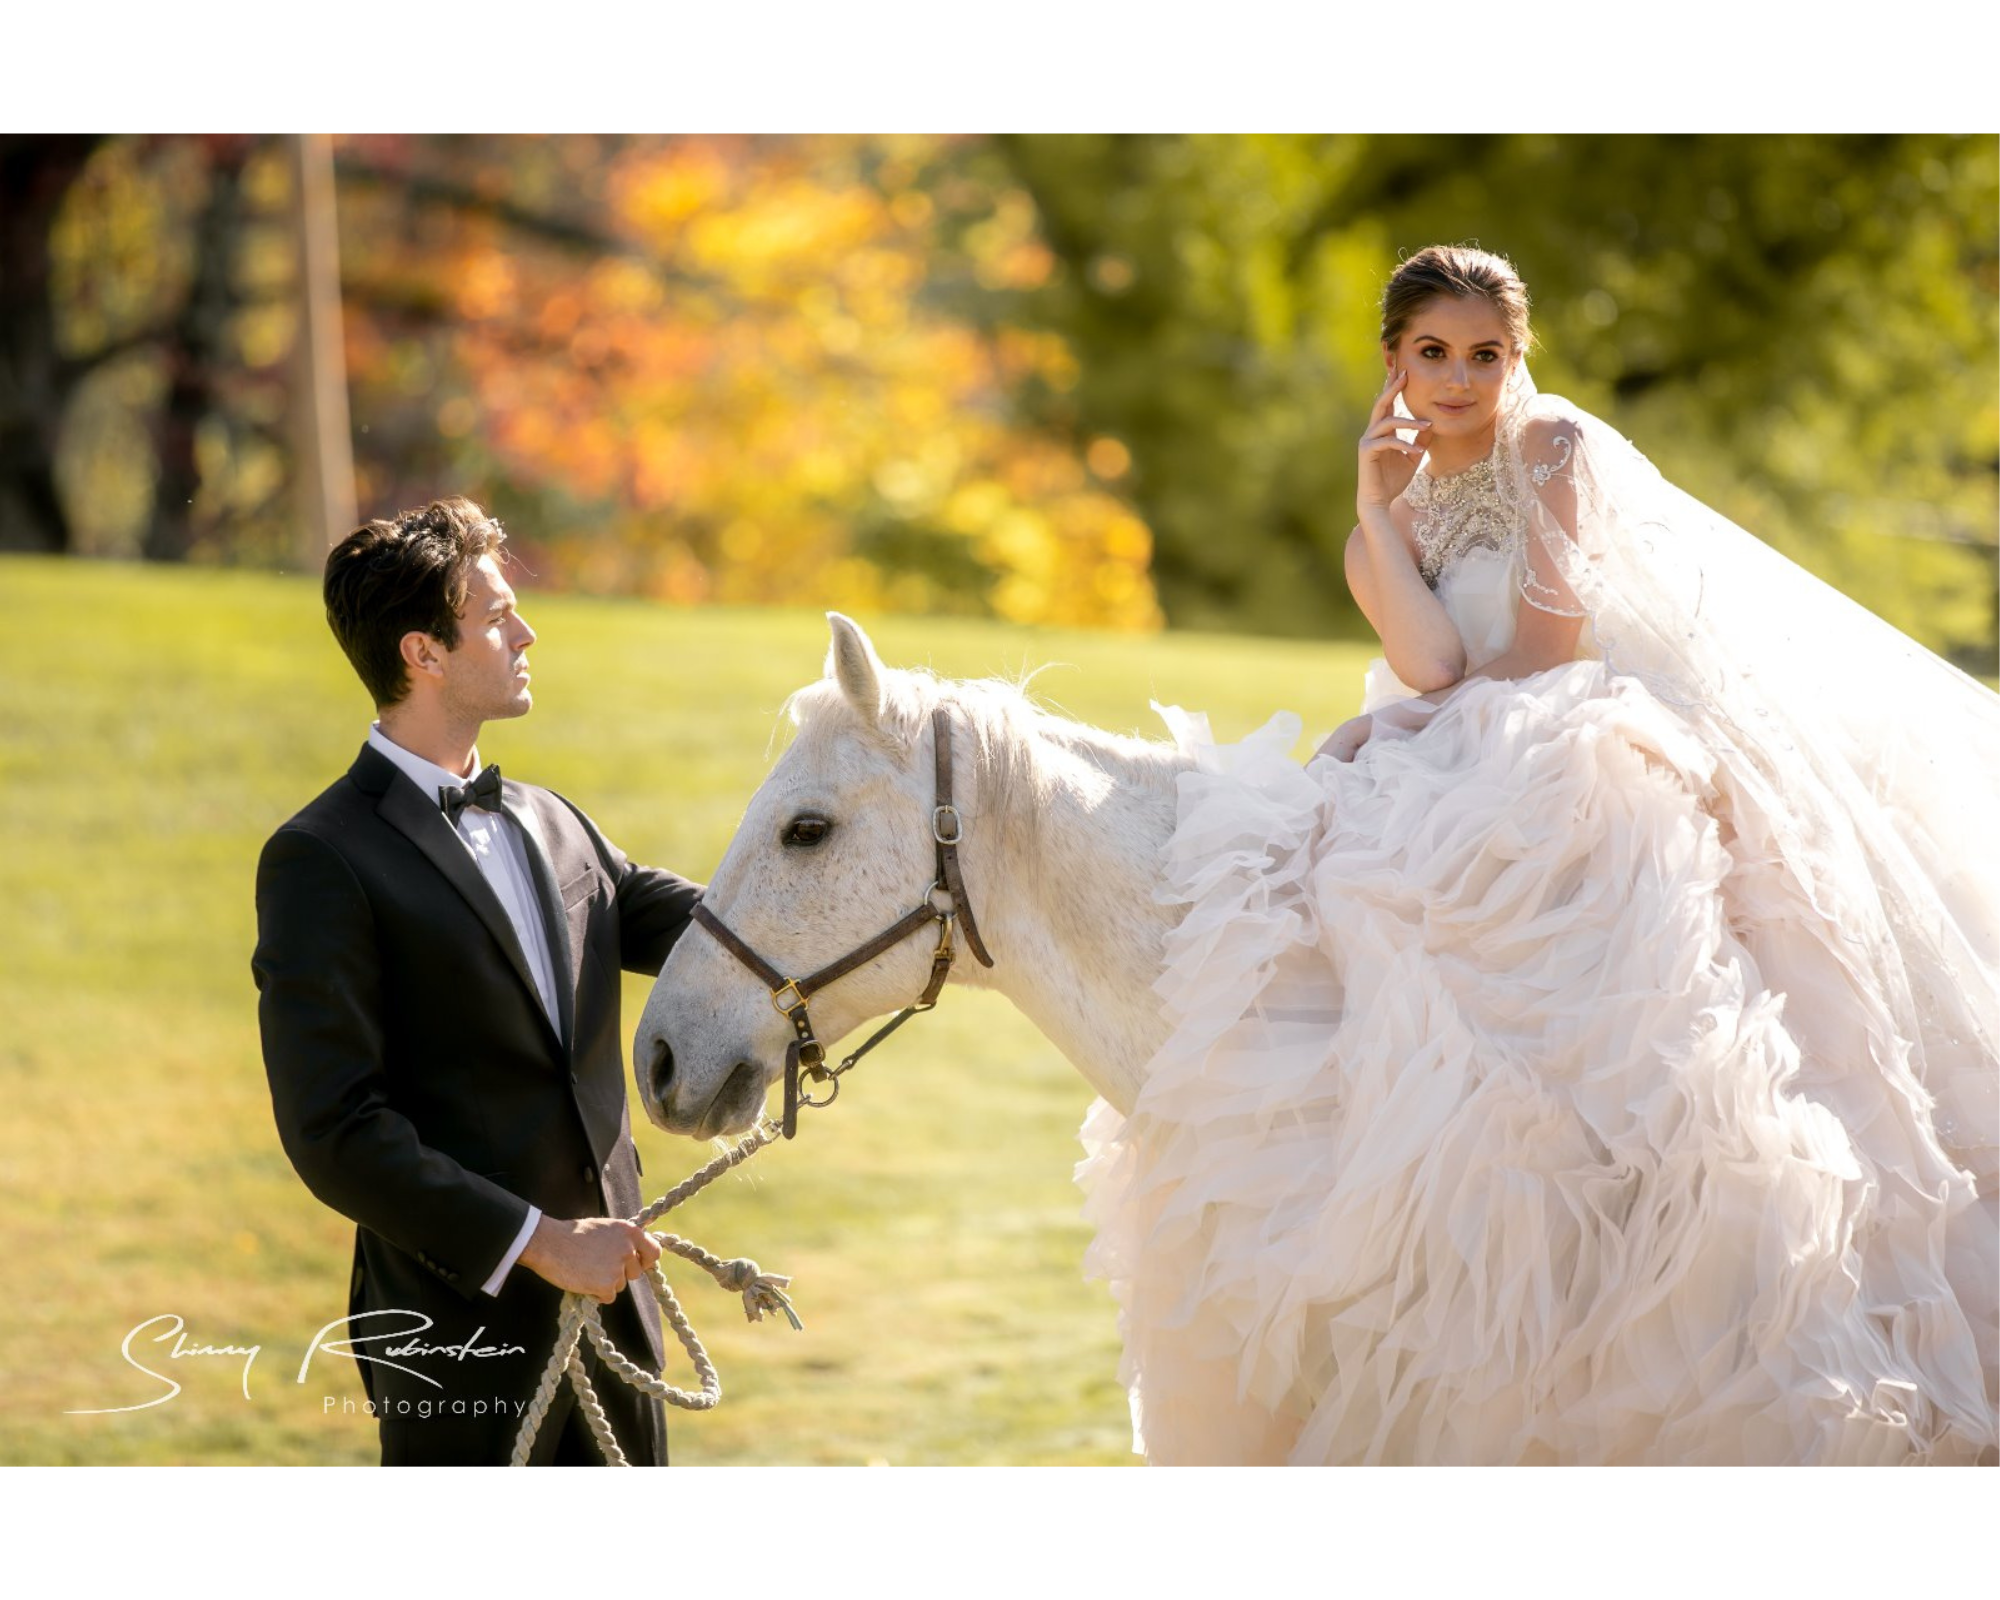 A fairytale moment as a bride in a beautiful gown and sparkling bridal headpiece sits on her white horse as her groom stands beside them.